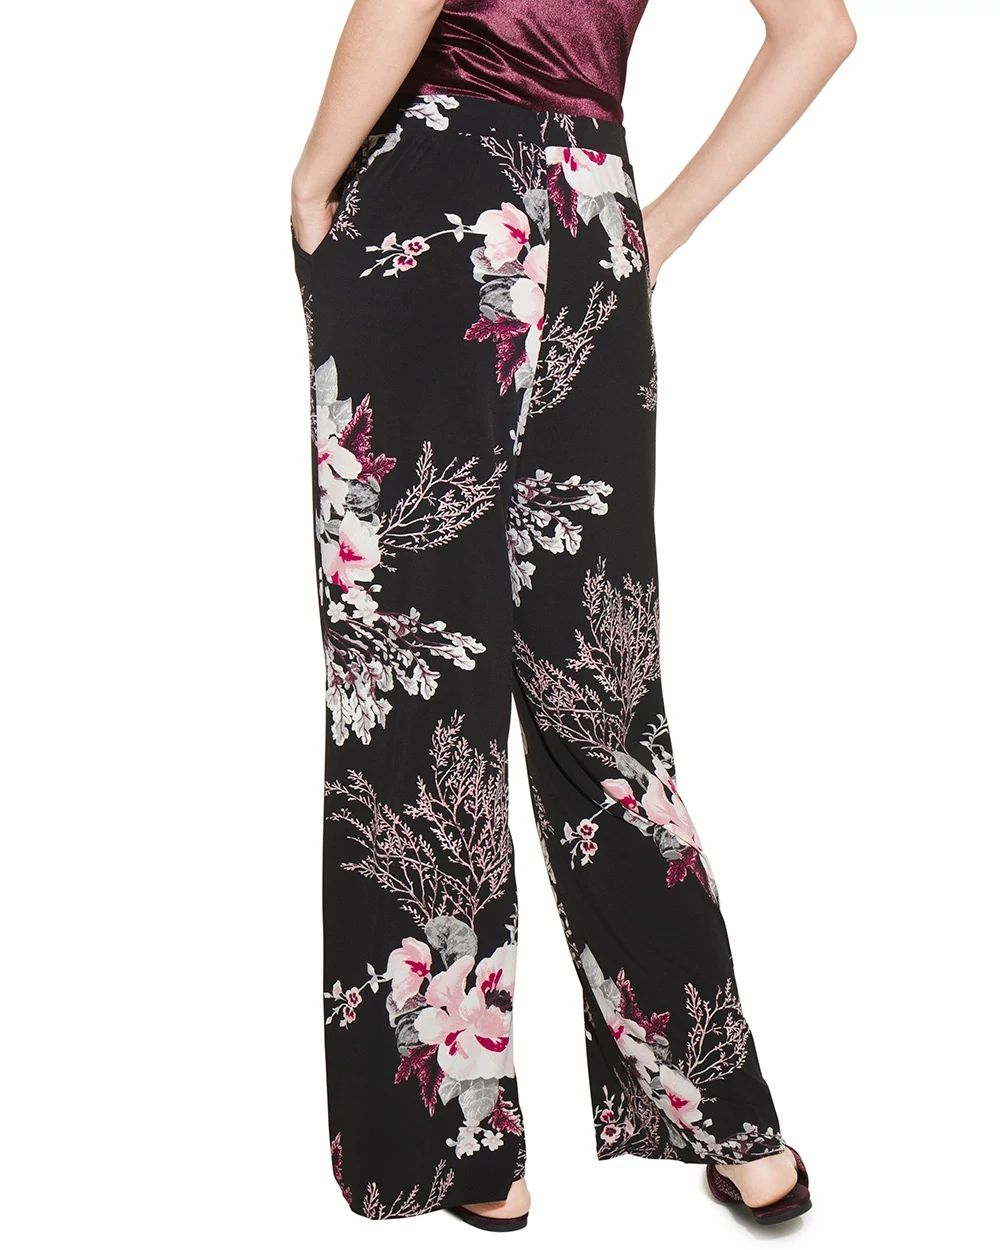 Outlet WHBM Wide-Leg Pants click to view larger image.